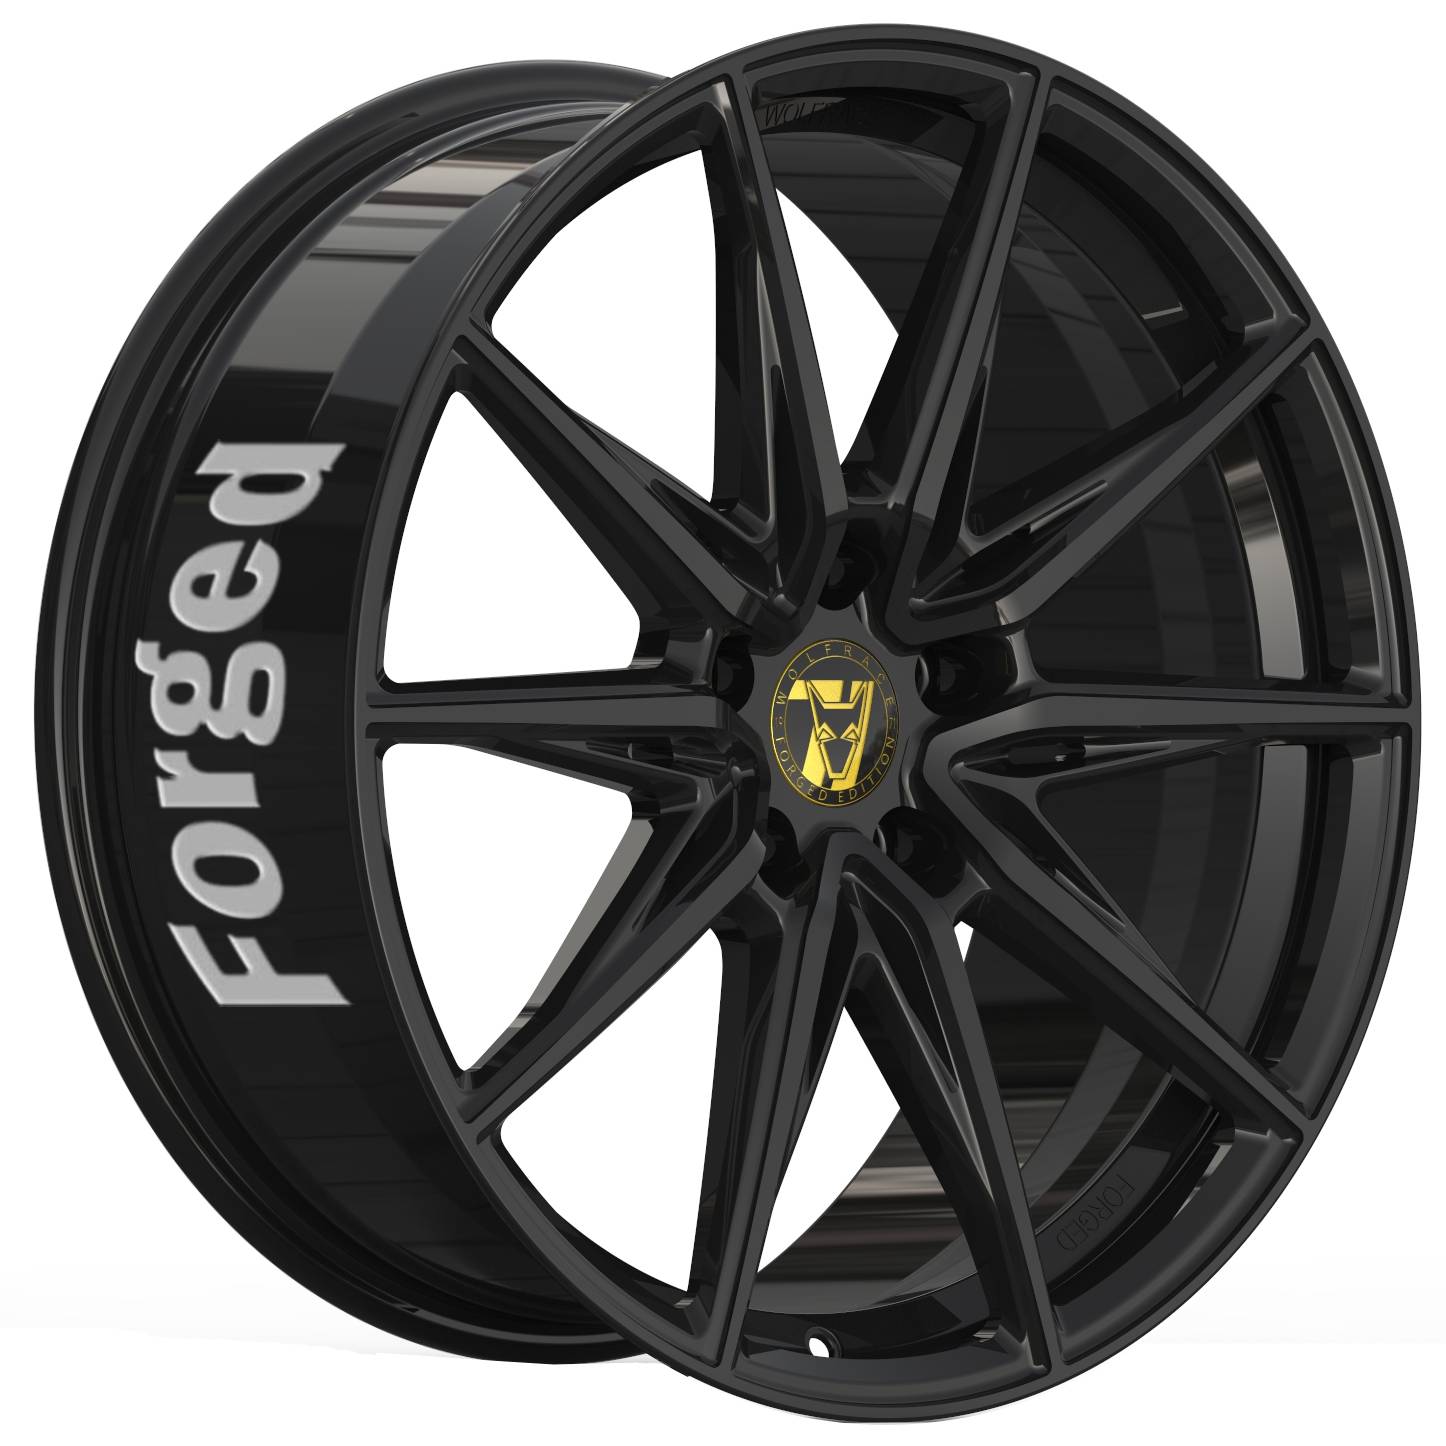 Jantes alu Demon Wheels 71 Forged Edition Urban Racer Forged [10x24] -5x114.3- ET 45